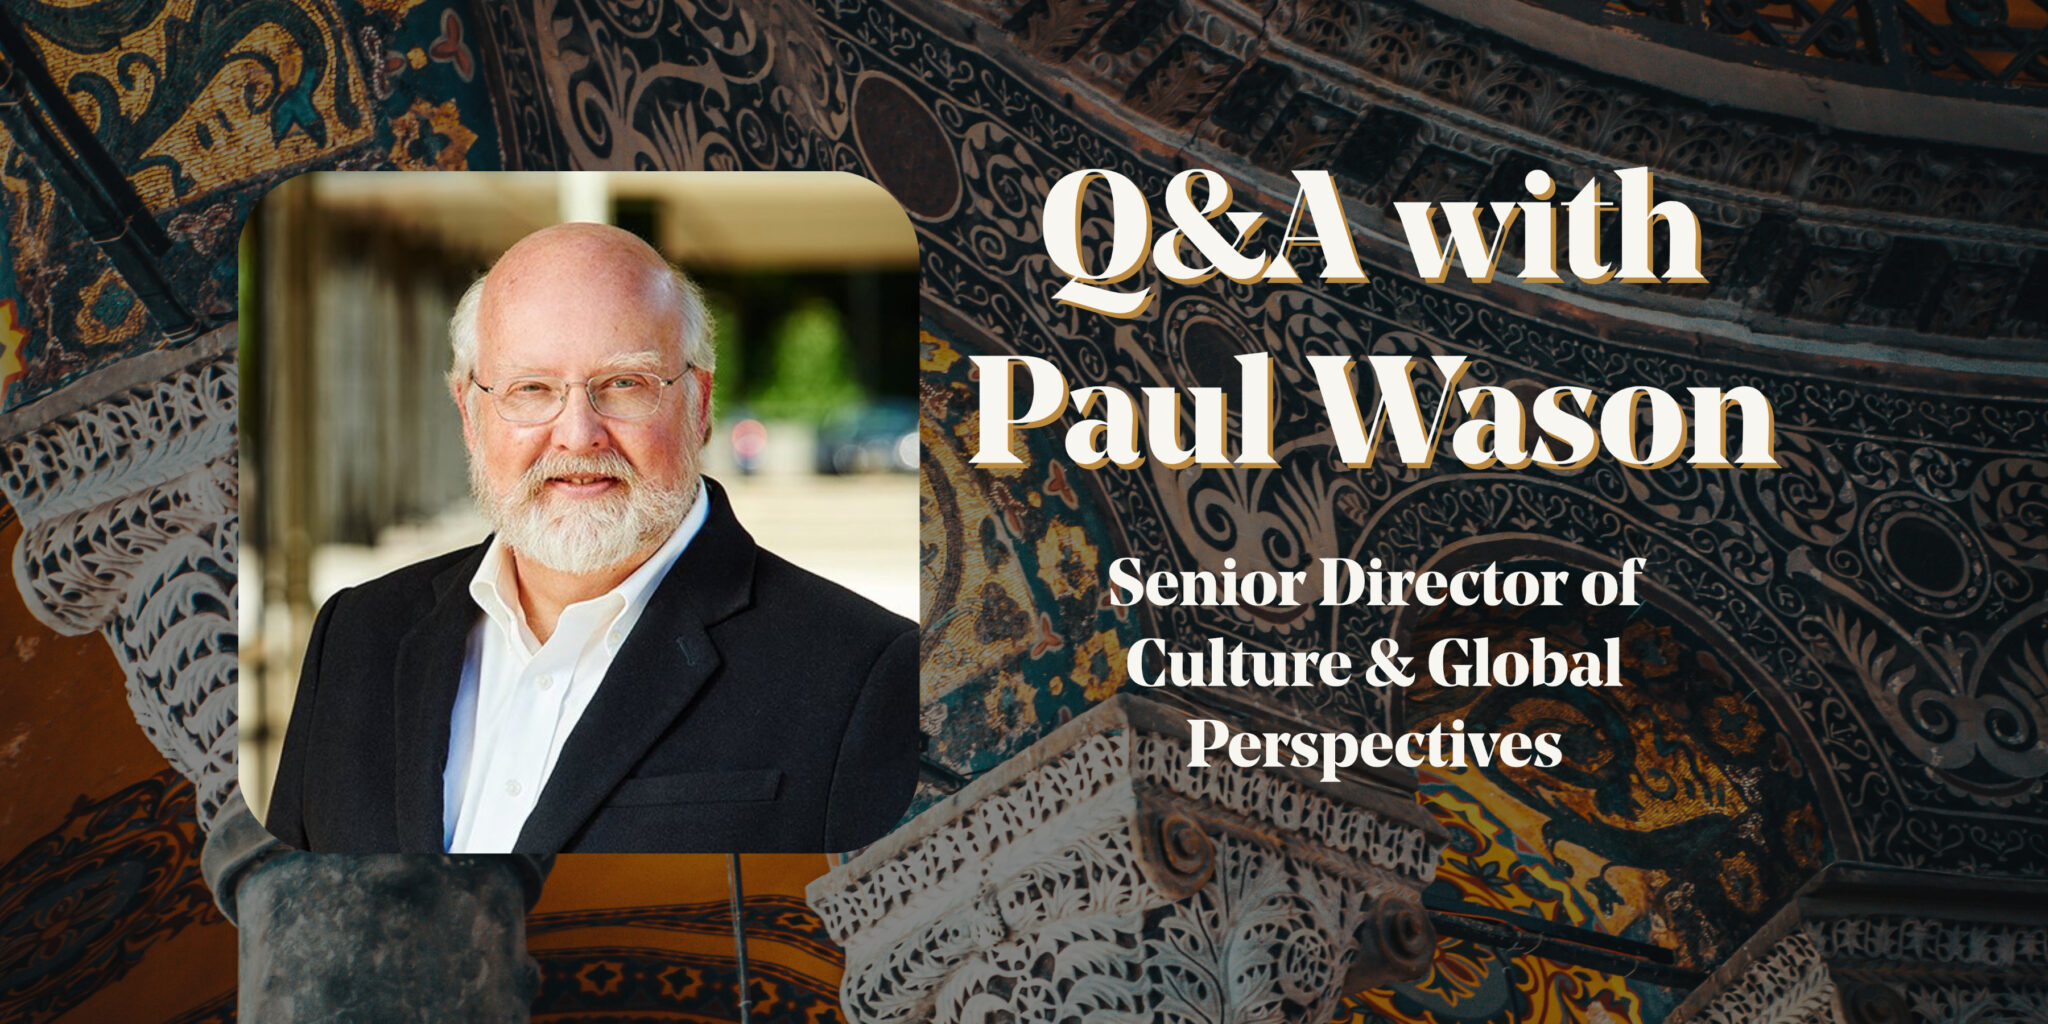 Can Culture Change the Future? A Conversation with Paul Wason, Senior Director of Culture & Global Perspectives